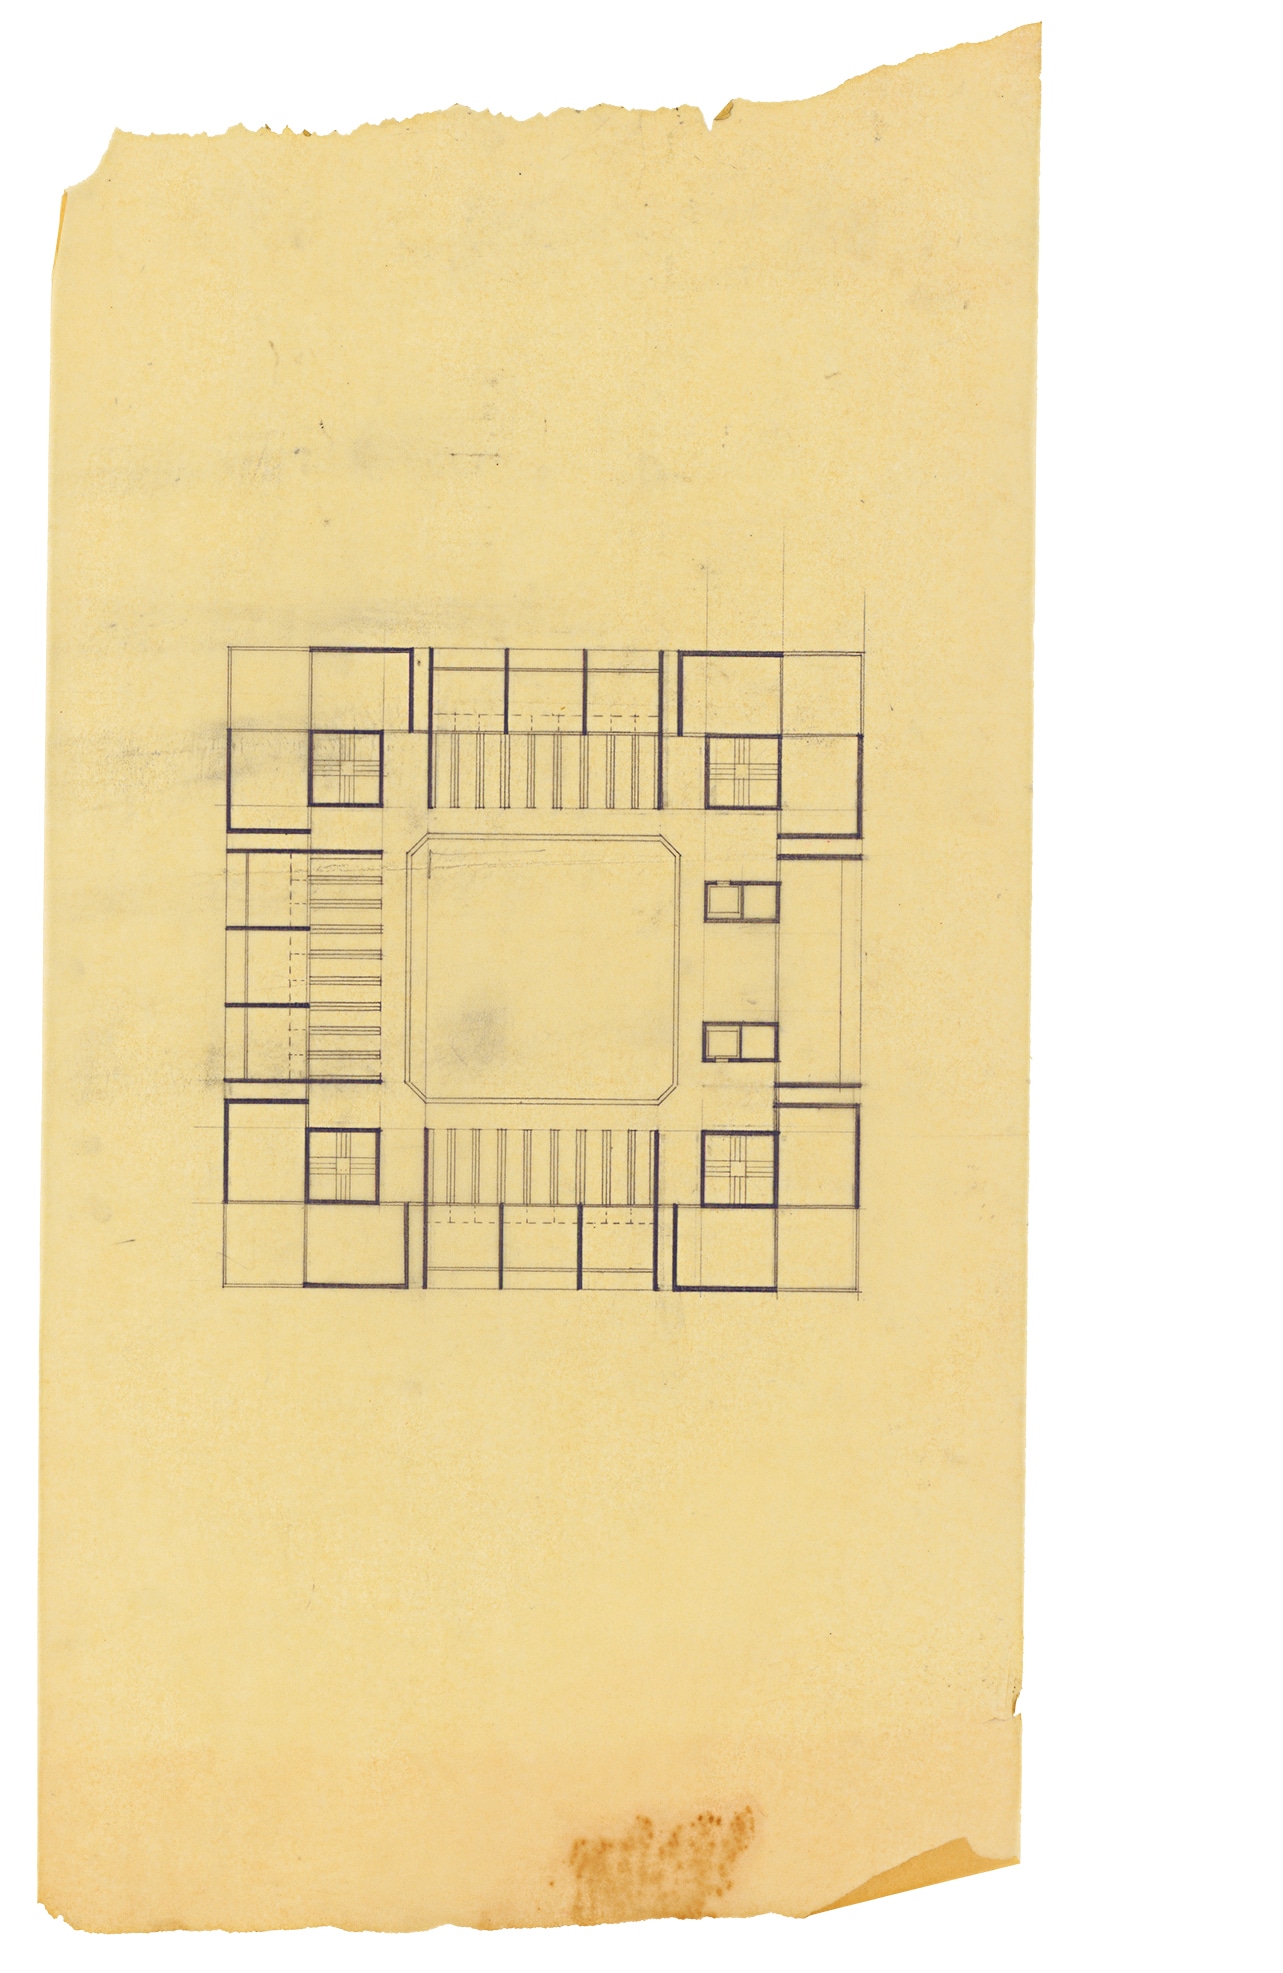 Review of 'The Evolution of a Building Complex: Louis I. Kahn's